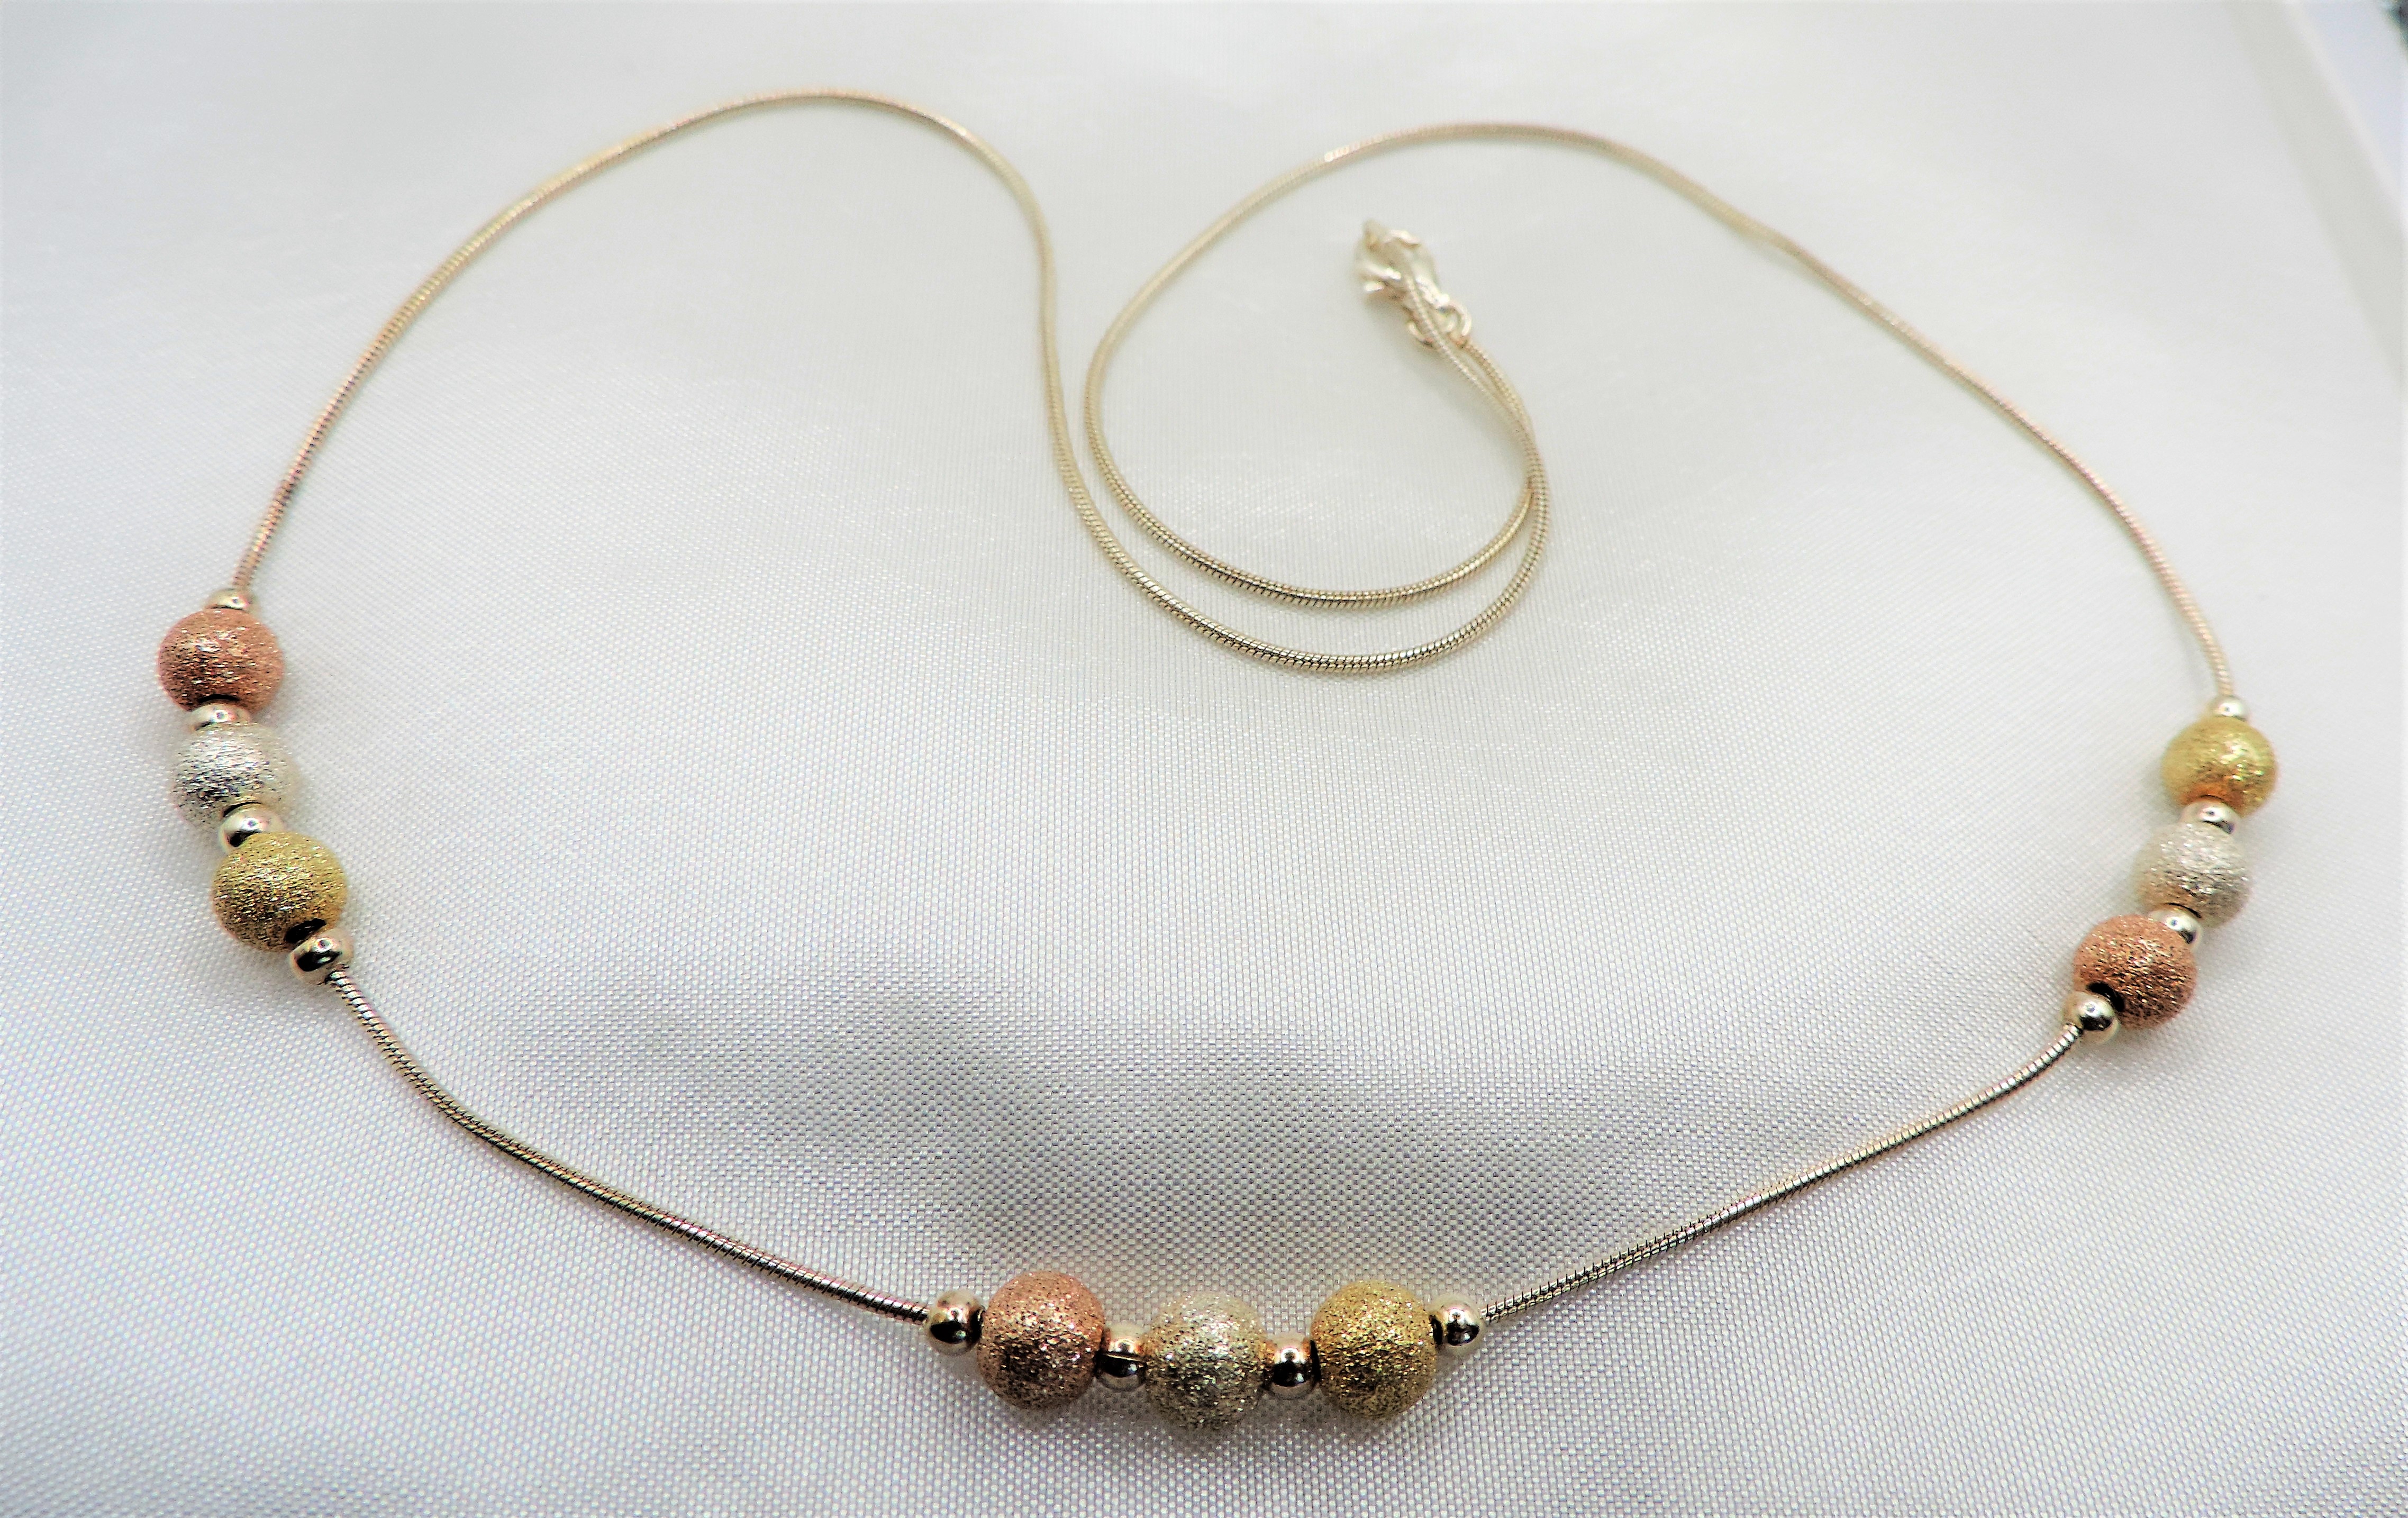 Italian Bi-Colour Gold on Sterling Silver Ball Bead Necklace - Image 3 of 3